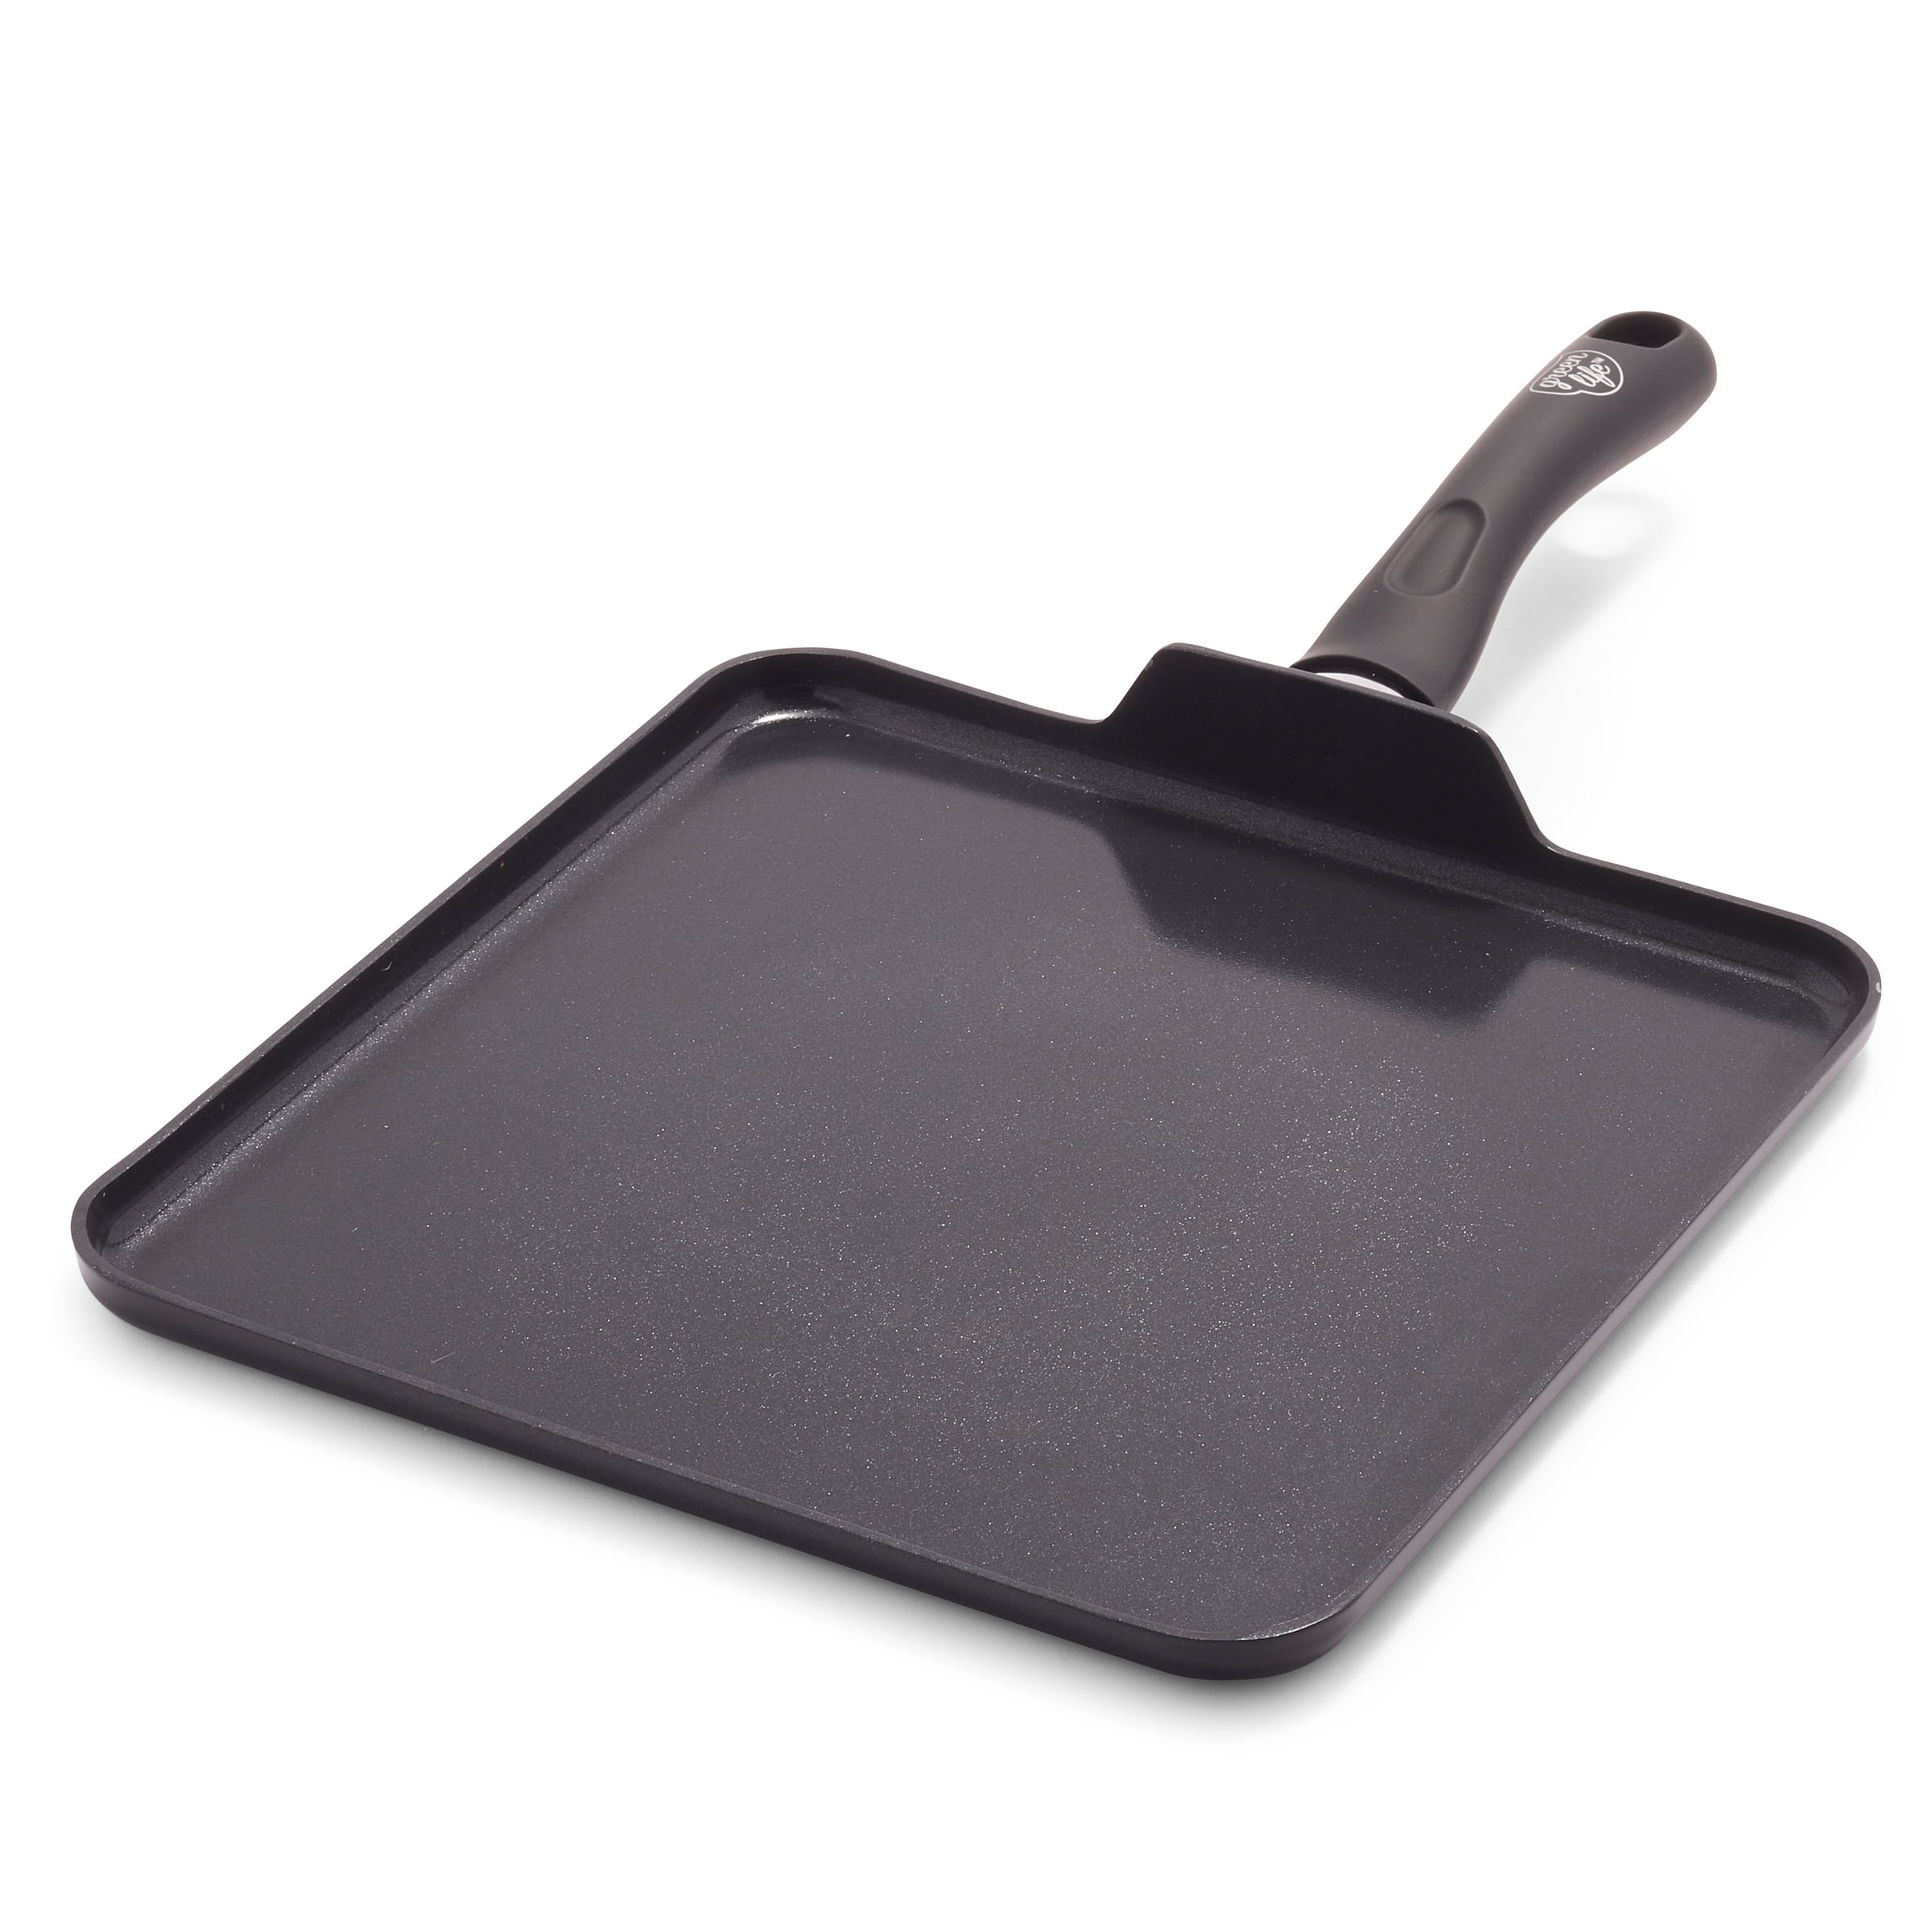 Black Groupe SEB 2100075717 Mirro A79713 Get A Grip Aluminum Nonstick Griddle Cookware 11-Inch 